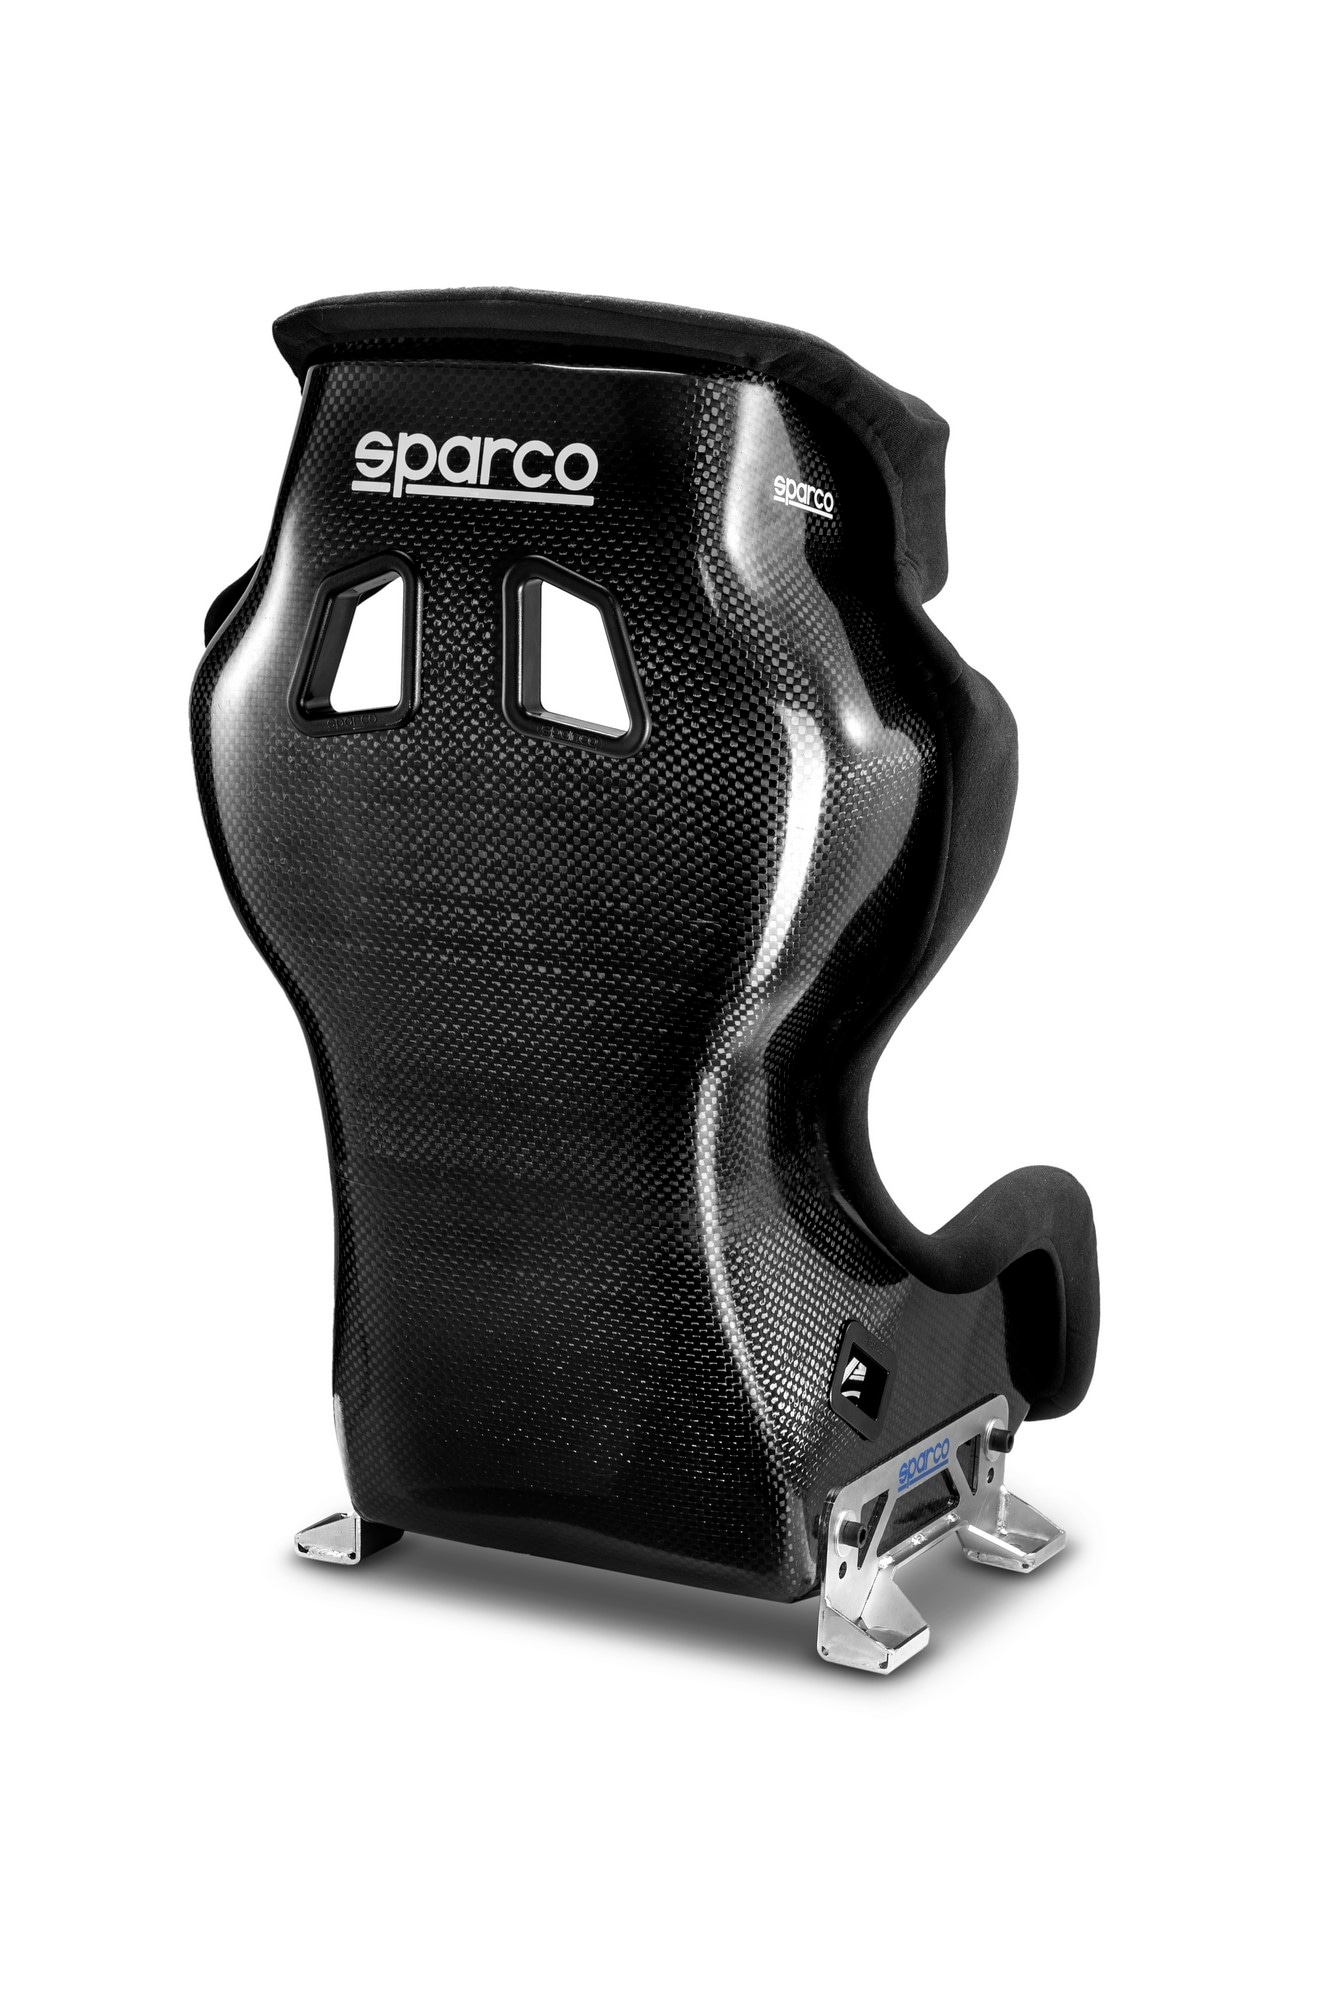 Racing Seat Sparco ADV Prime